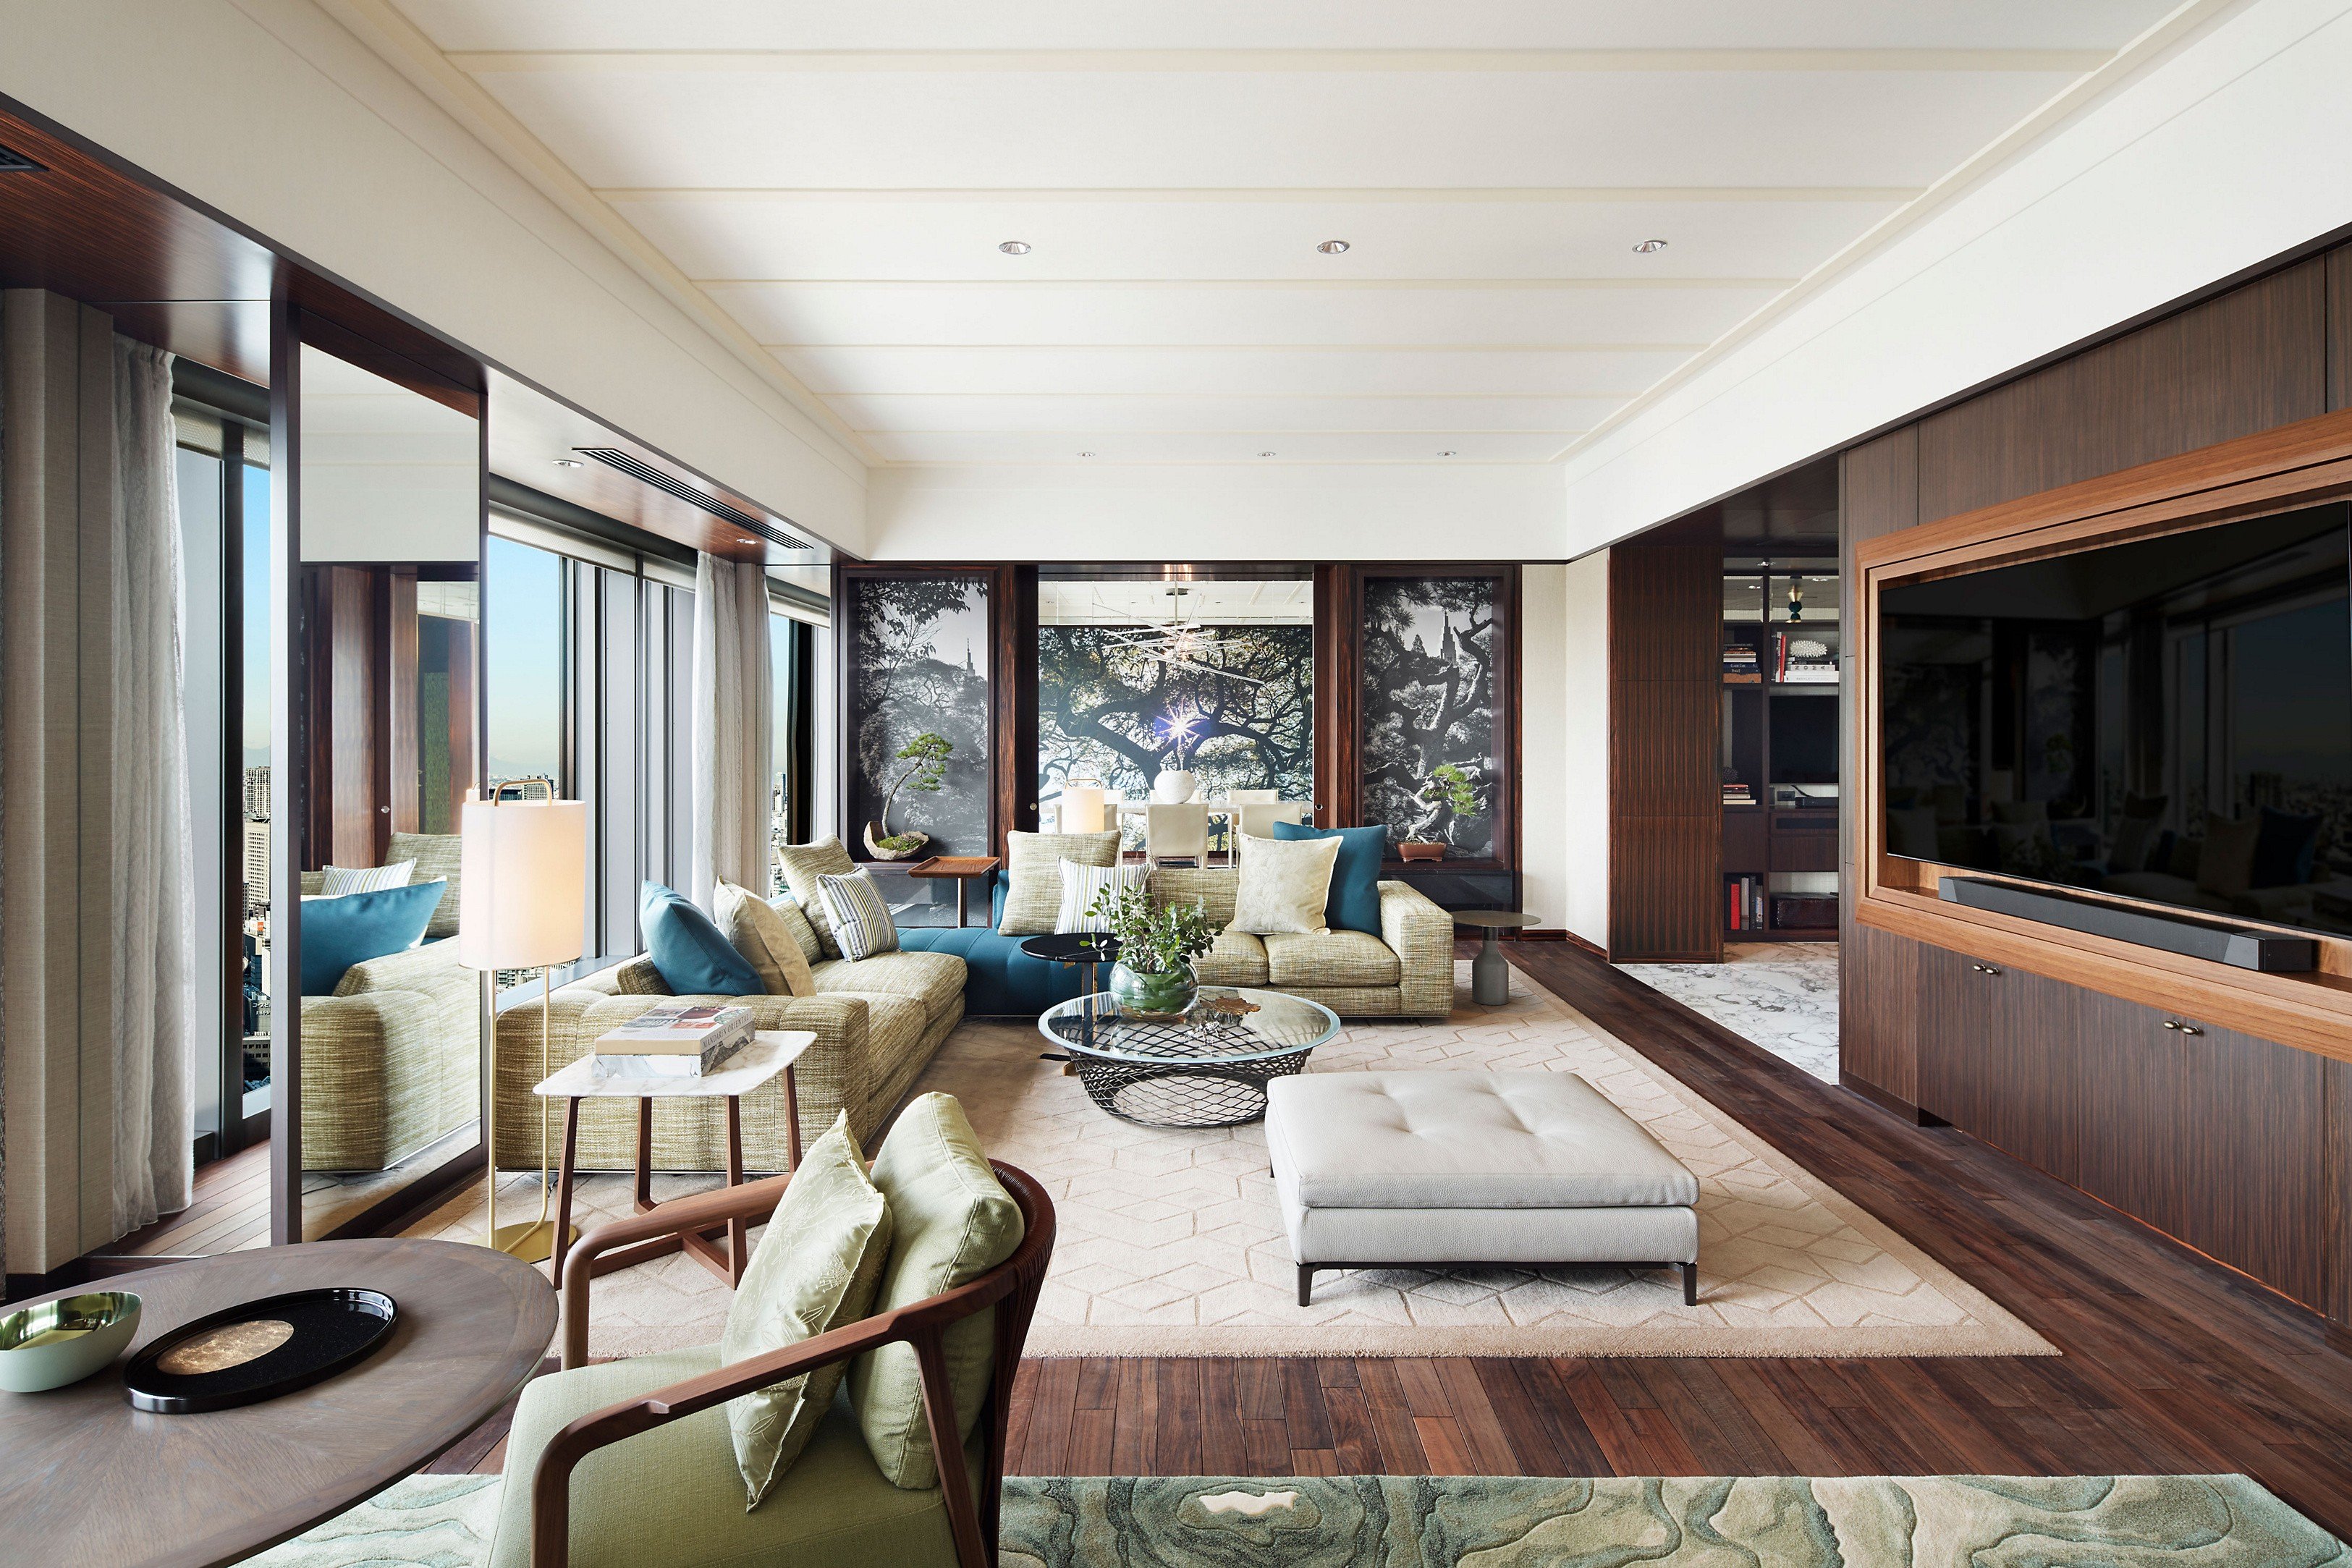 For US$18,000 a night, Mandarin Oriental Tokyo’s President Suite has a bedroom, living room, study, dining room and spa bathroom, and stunning views of Mount Fuji.